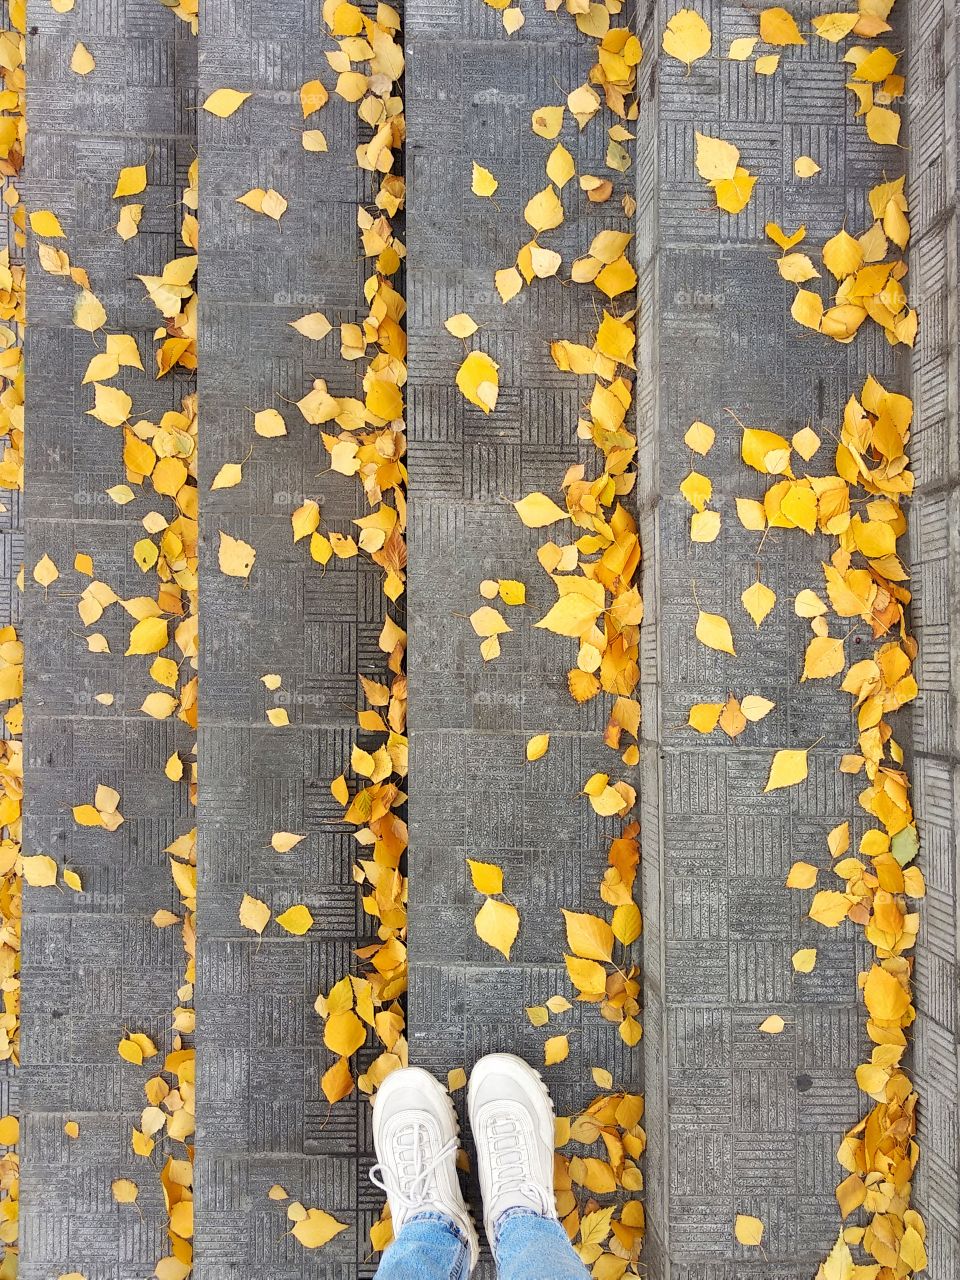 My legs in jeans and sneakers on the steps with birch yellow leaves